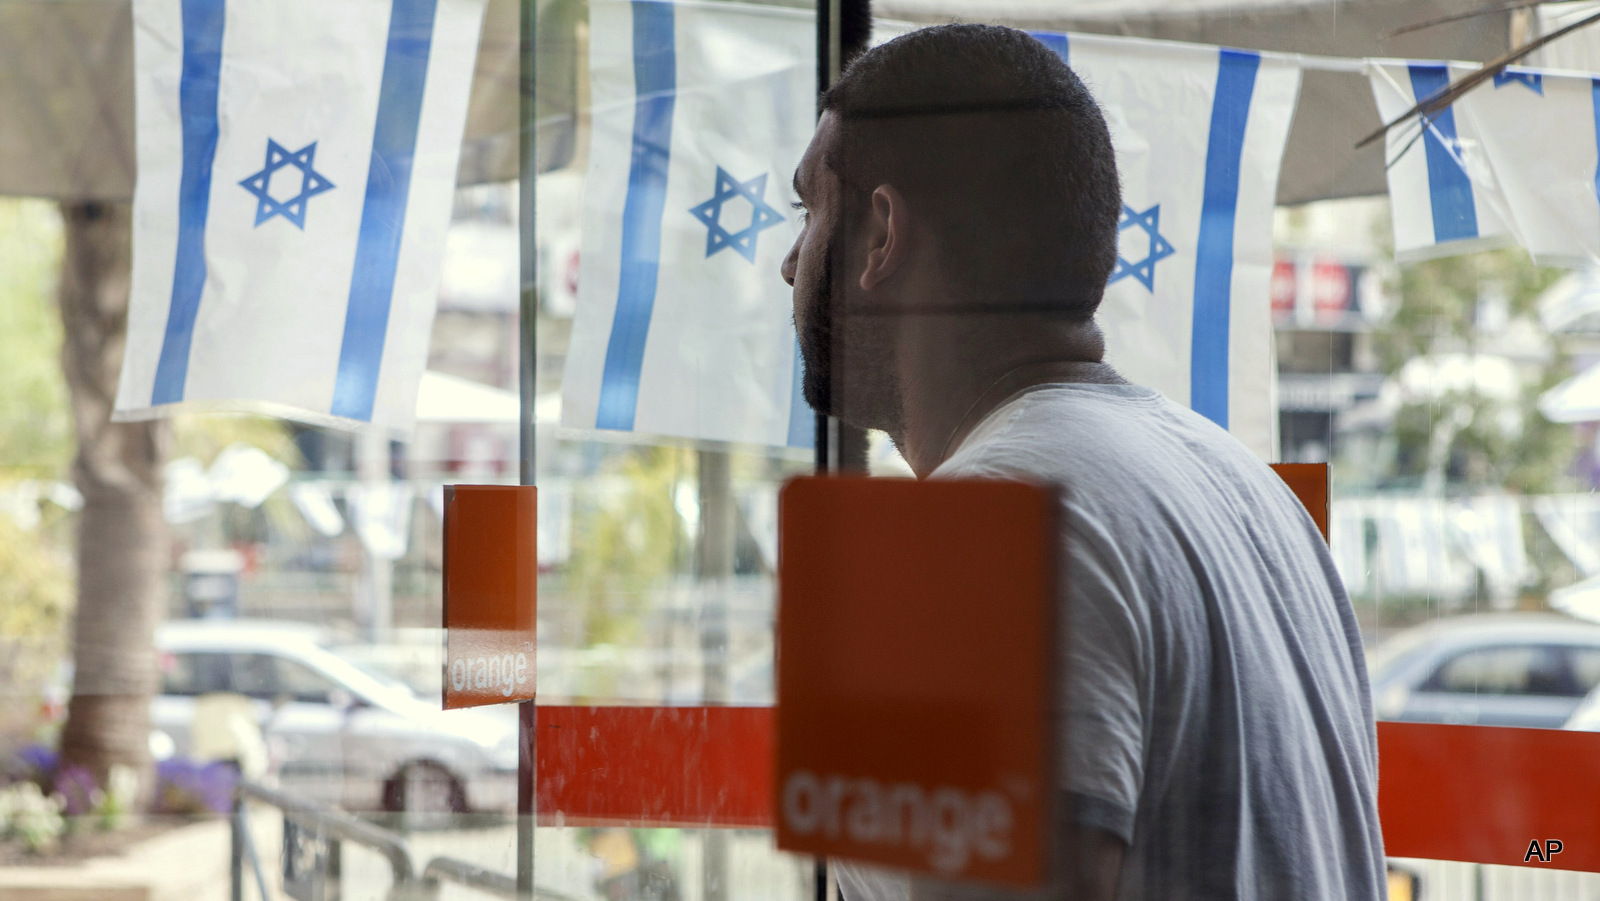 An Israeli man walks out from the "Partner Orange" Communications Company's offices in the city of  Rosh Haain, Israel